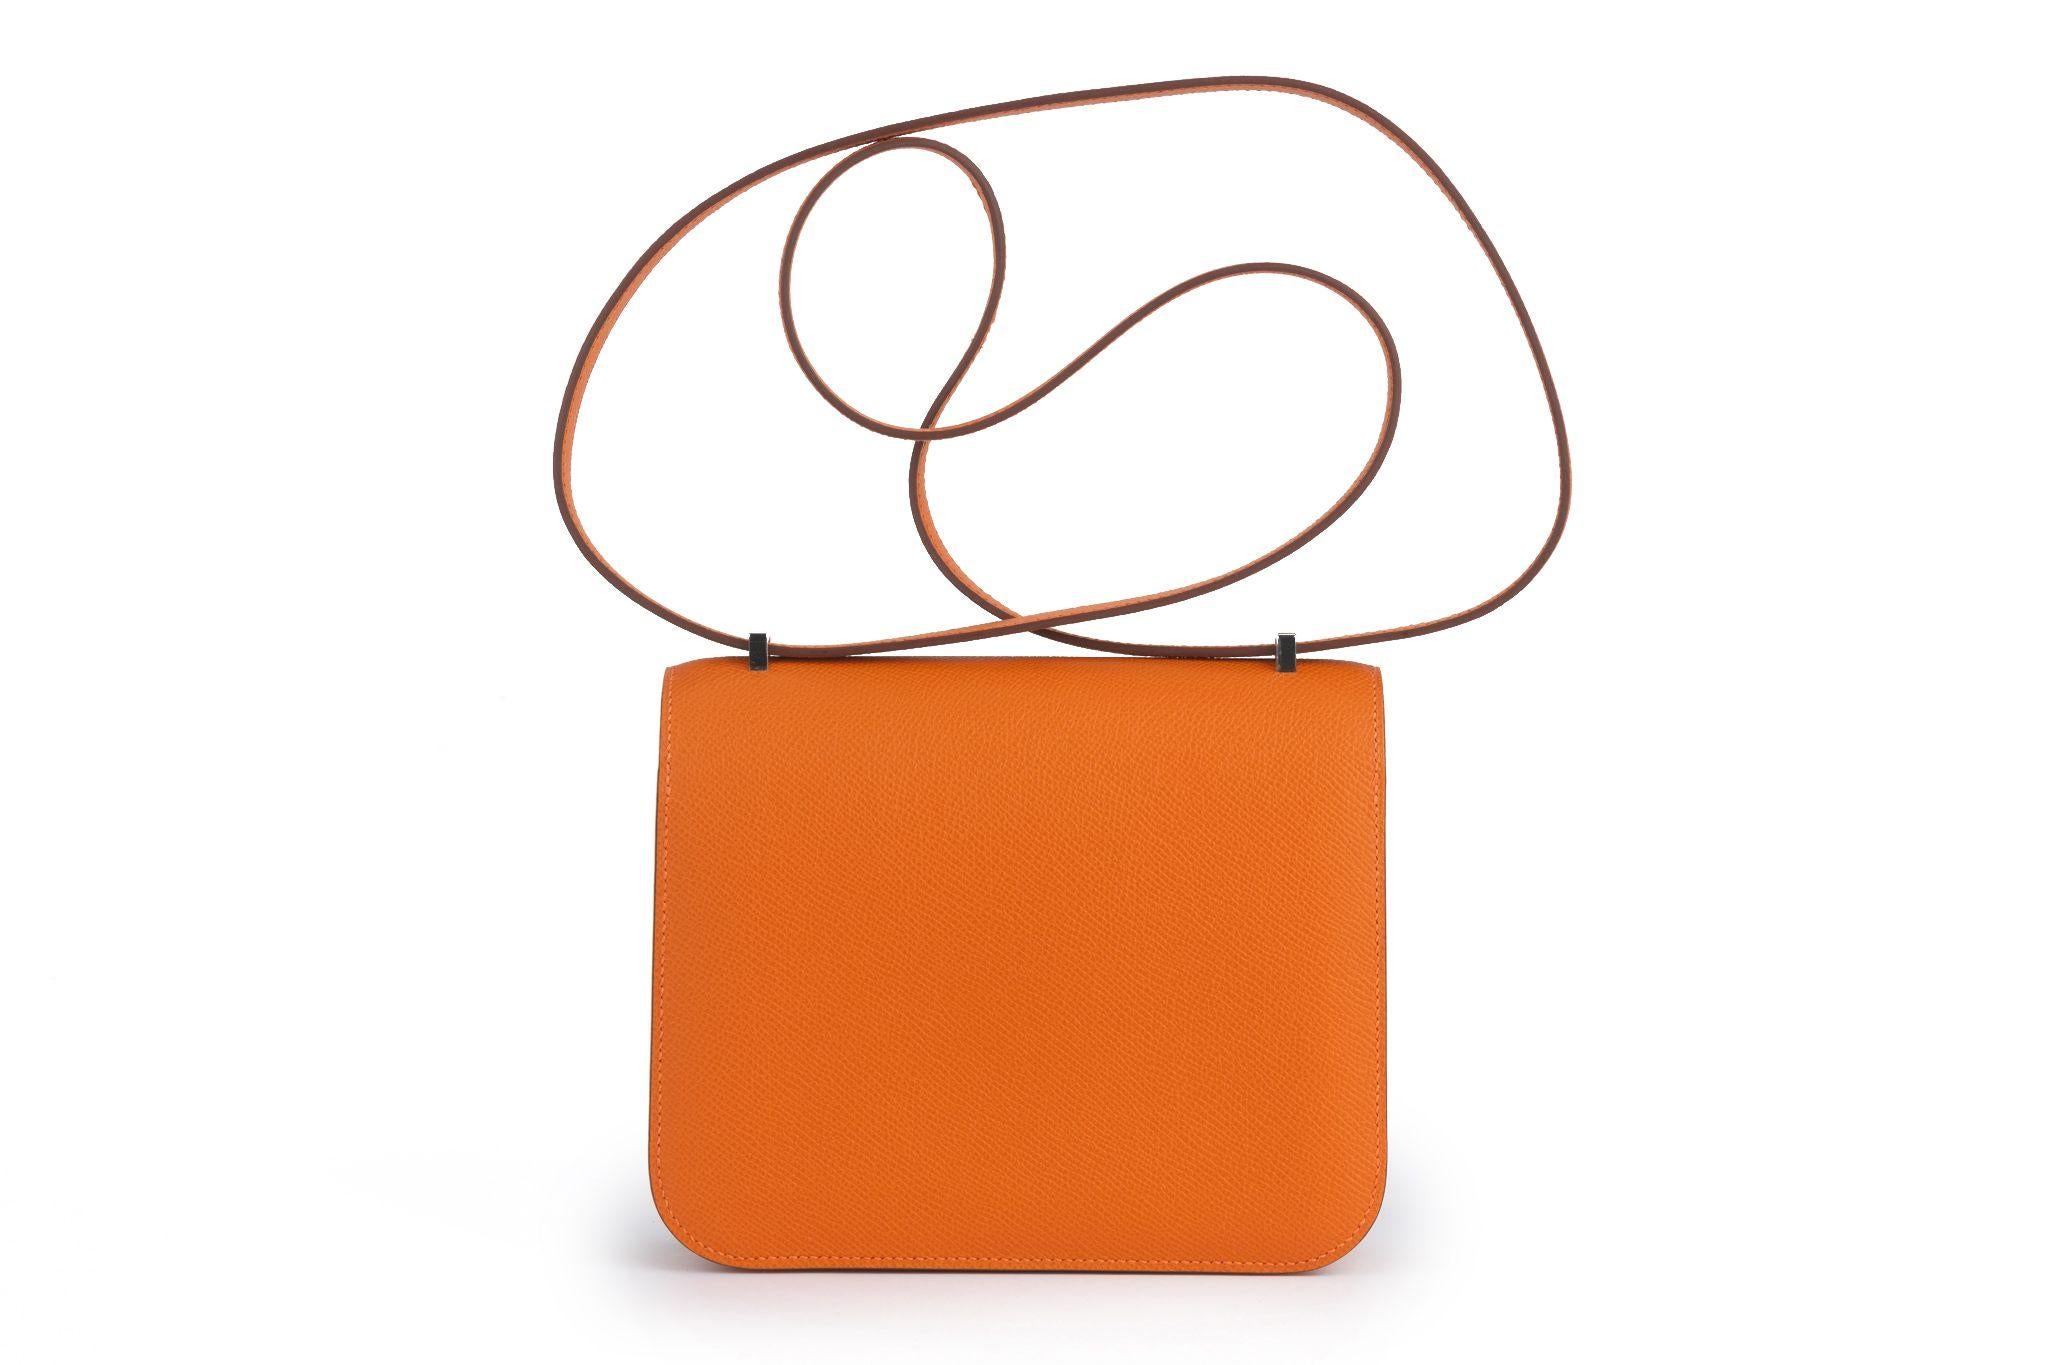 Hermes New Orange Mini Constance Handbag In New Condition For Sale In West Hollywood, CA